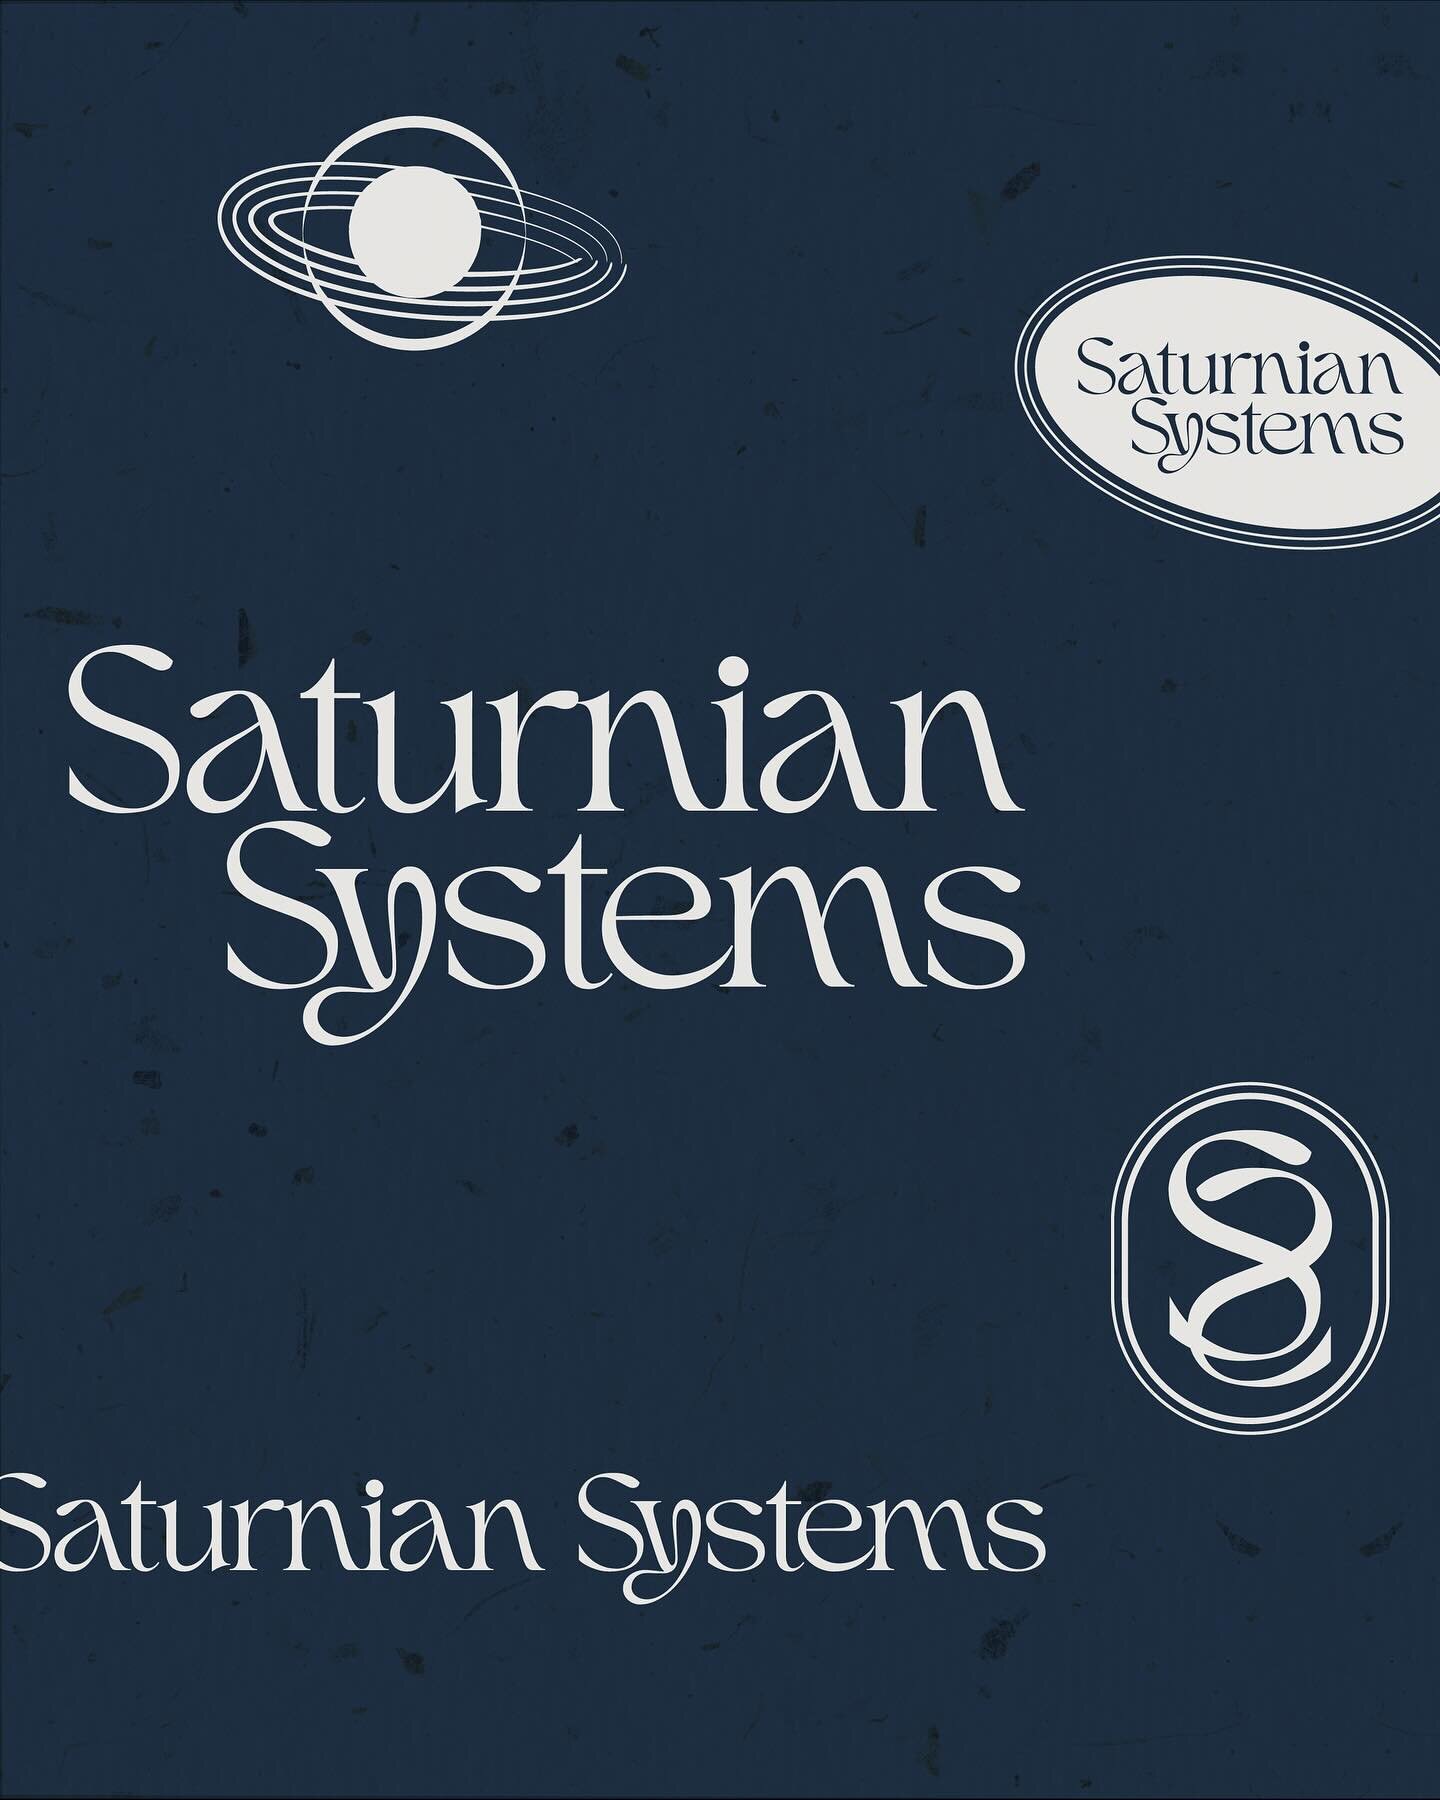 Brand Design ⦁ Website Design ⦁ Social Media Design // Saturnian Systems ― where purpose-driven business owners get support designing business systems that spark serenity.

Setting out on a rebranding journey, Mckinley came to us with a vision to evo